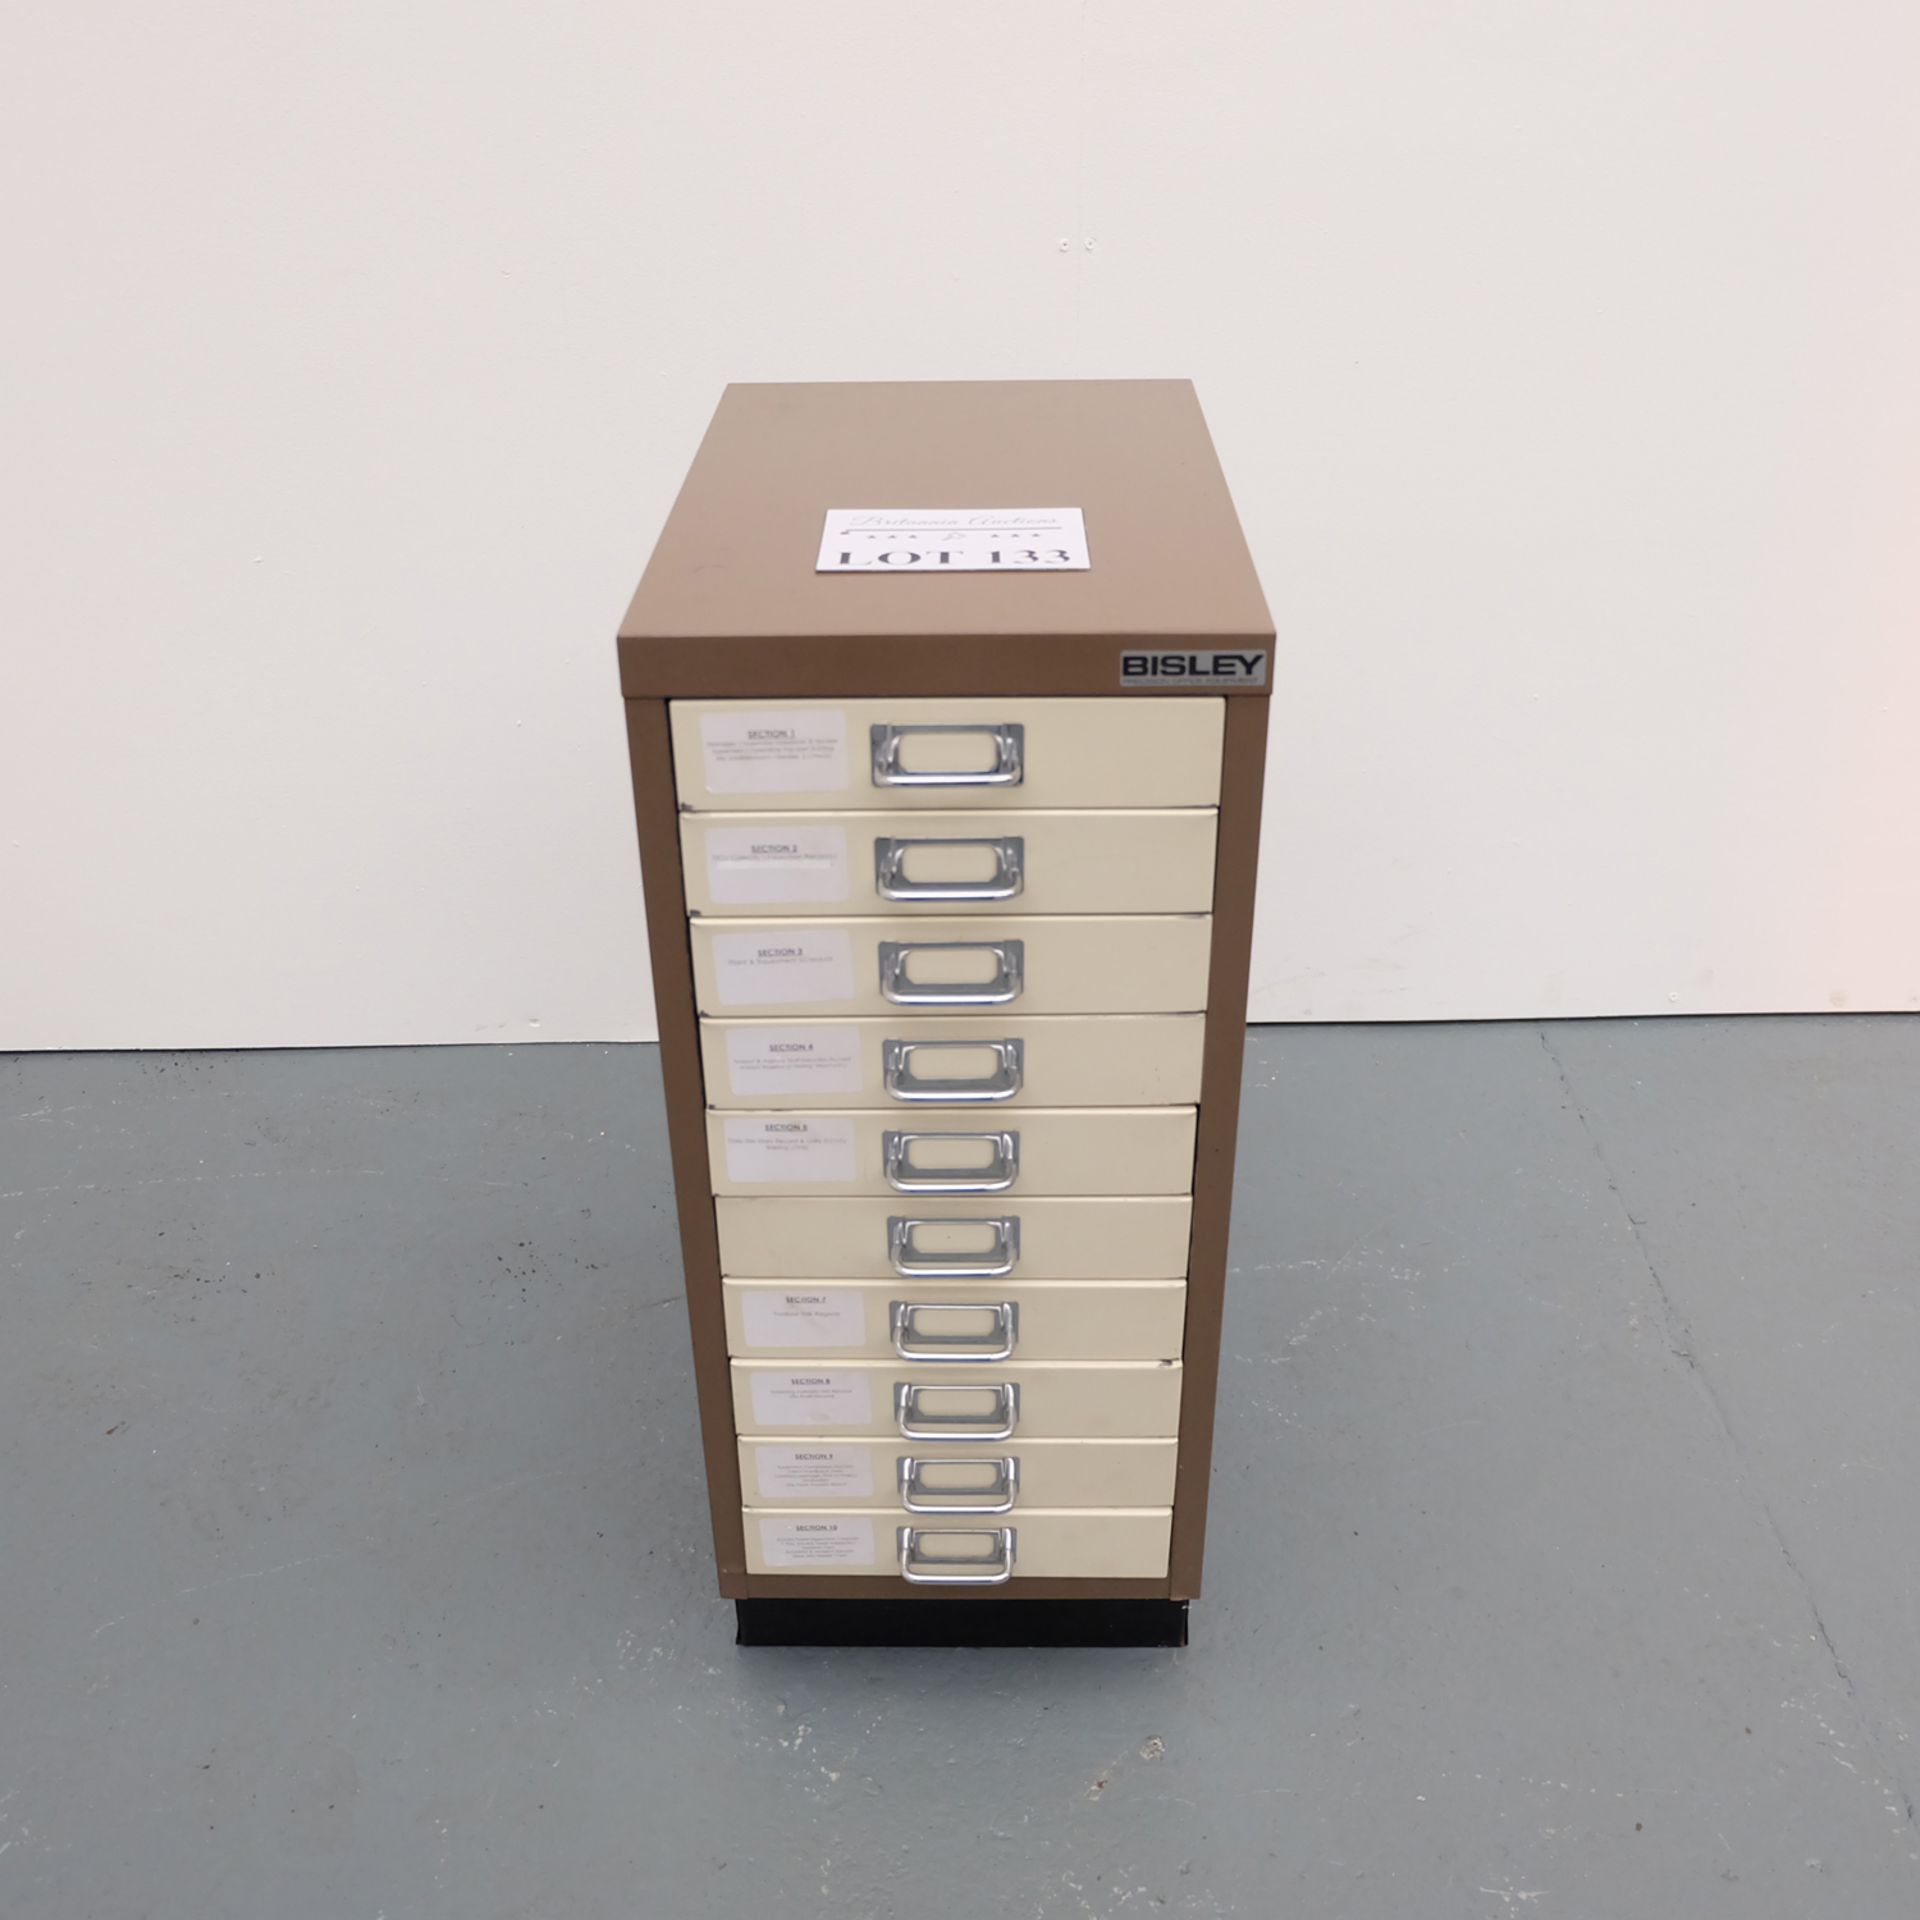 BISLEY Set of Drawers. 280mm x 410mm x 675mm High Approx.